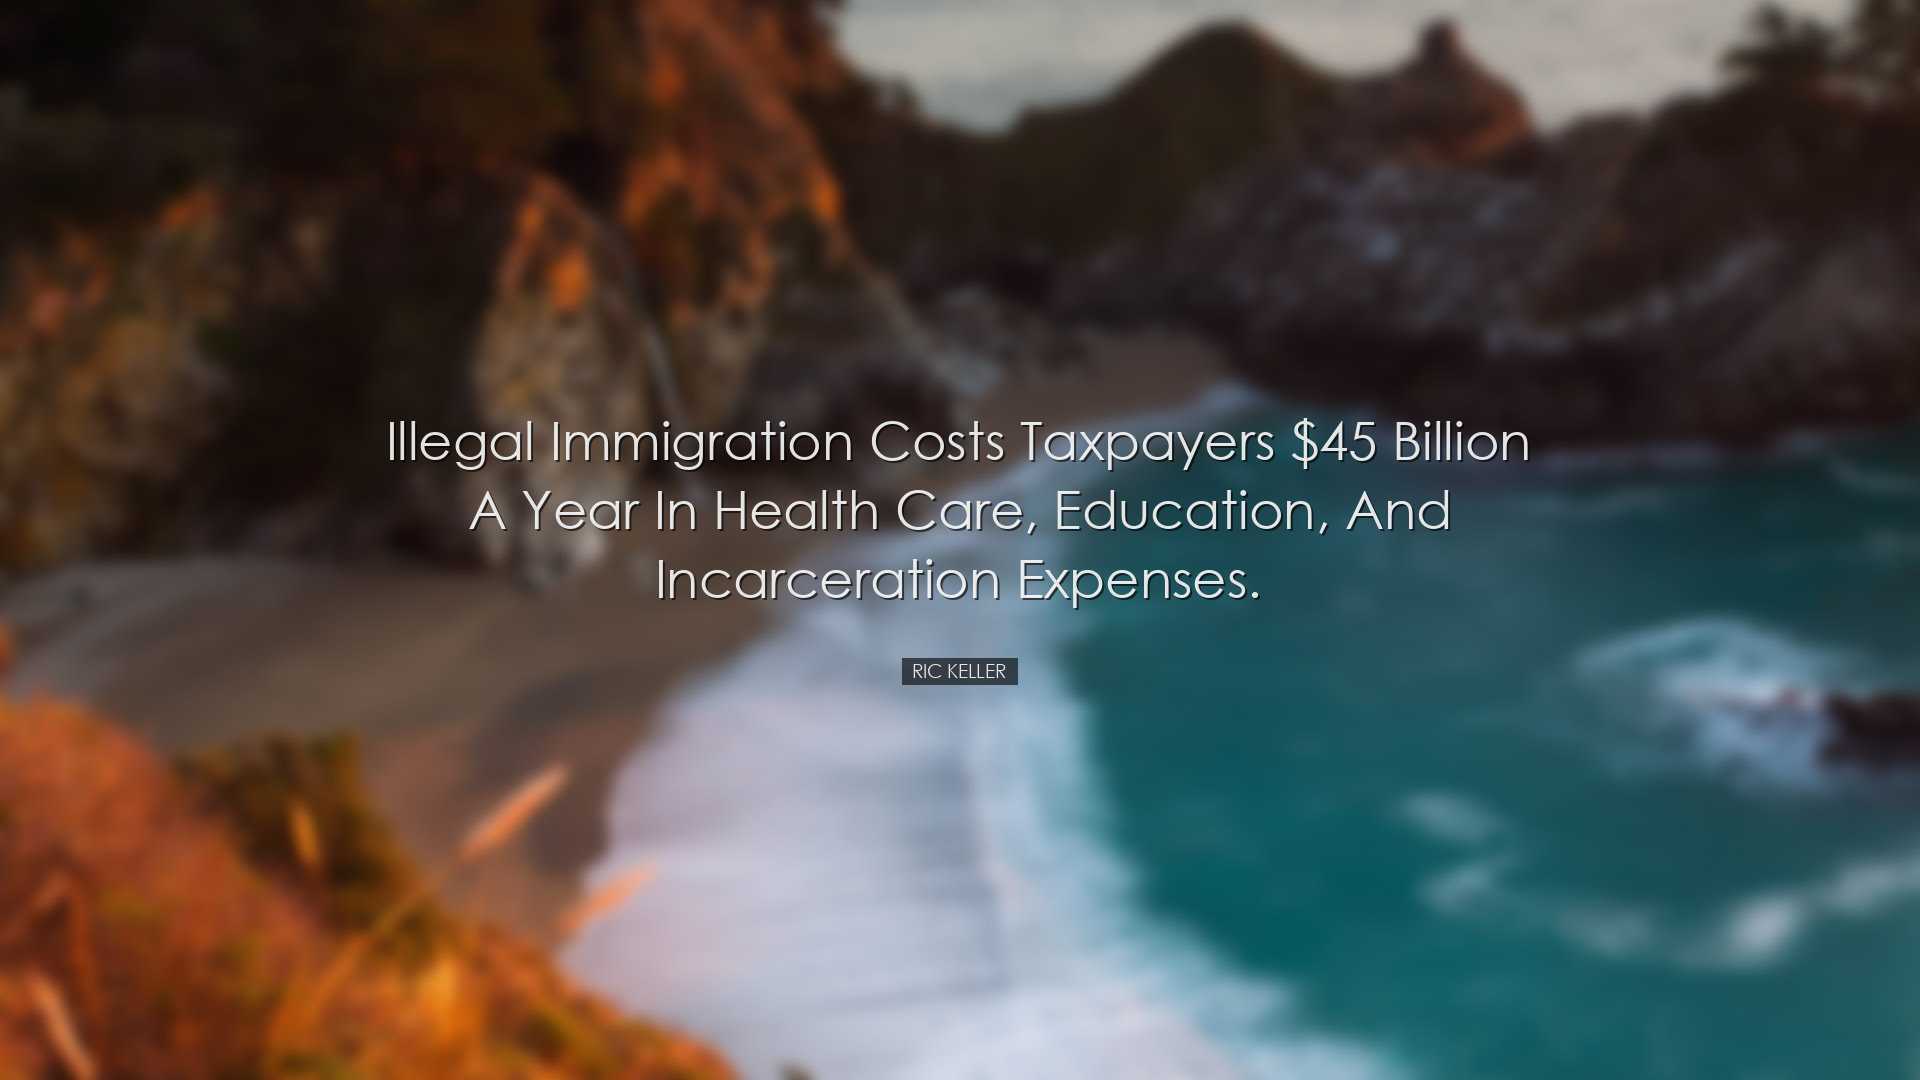 Illegal immigration costs taxpayers $45 billion a year in health c